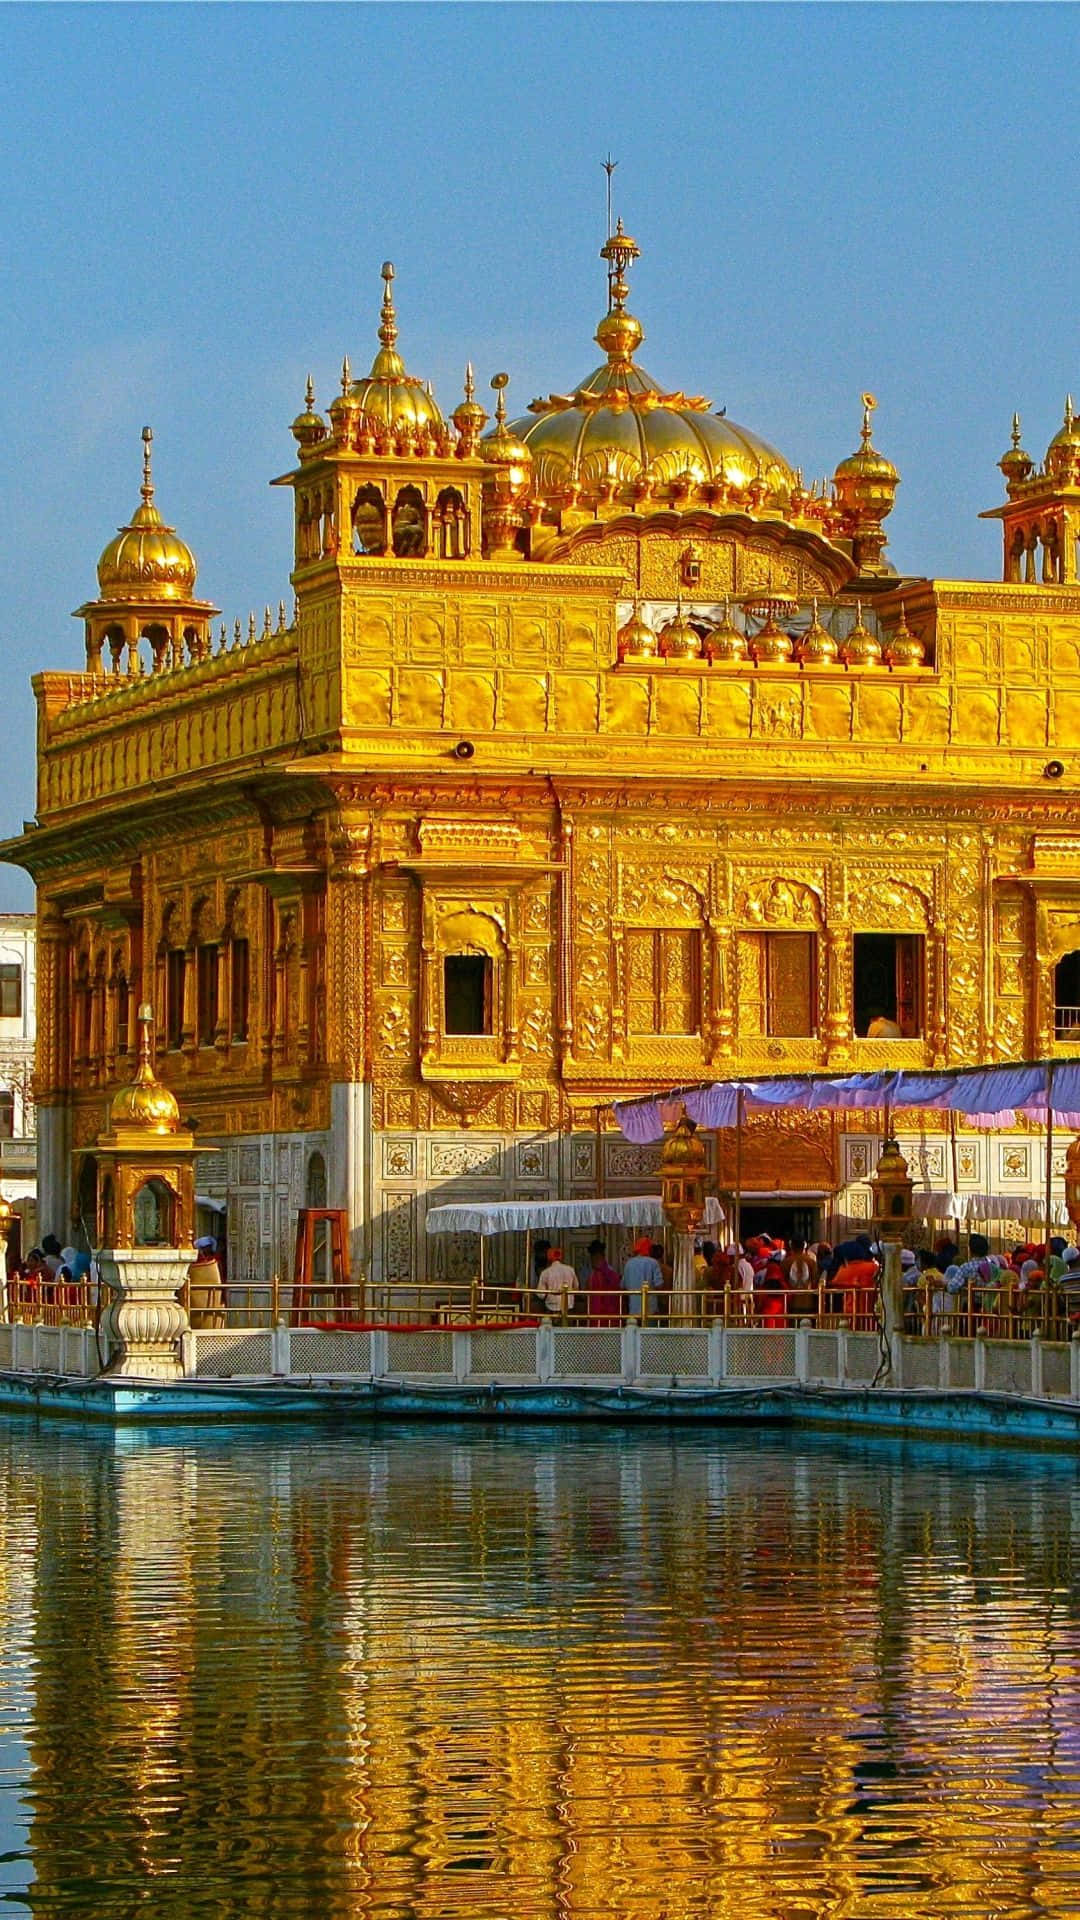 Serene view of the Golden Temple in Amritsar